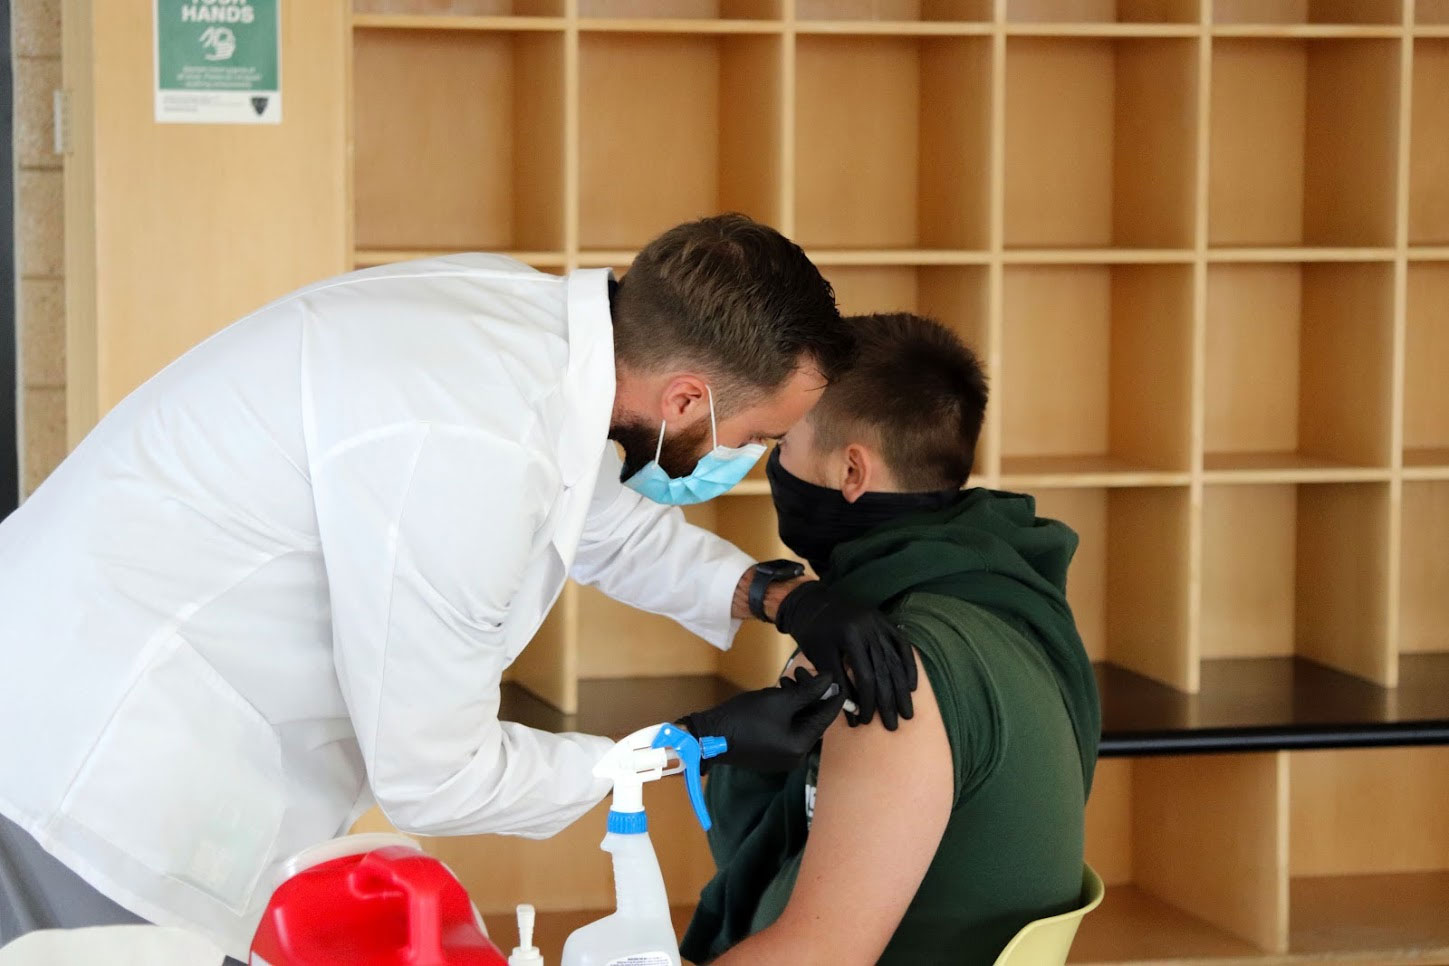 A male student receives a flu shot in the arm from a doctor in white coat.